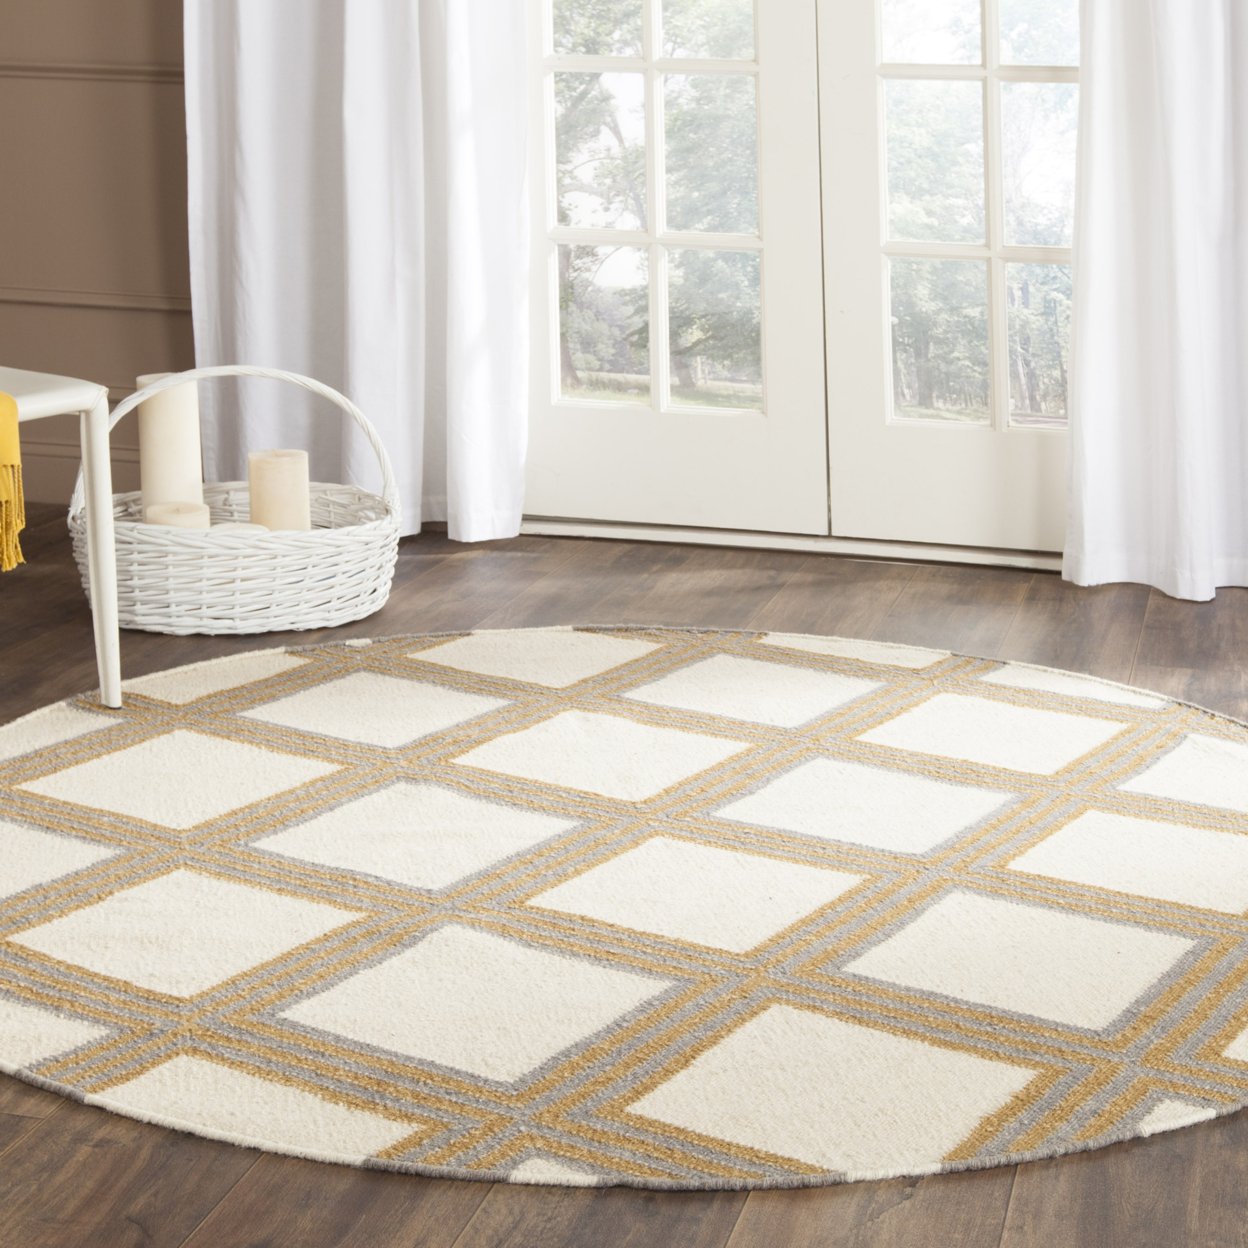 SAFAVIEH Dhurries DHU109A Handwoven Ivory / Gold Rug - 6' Square